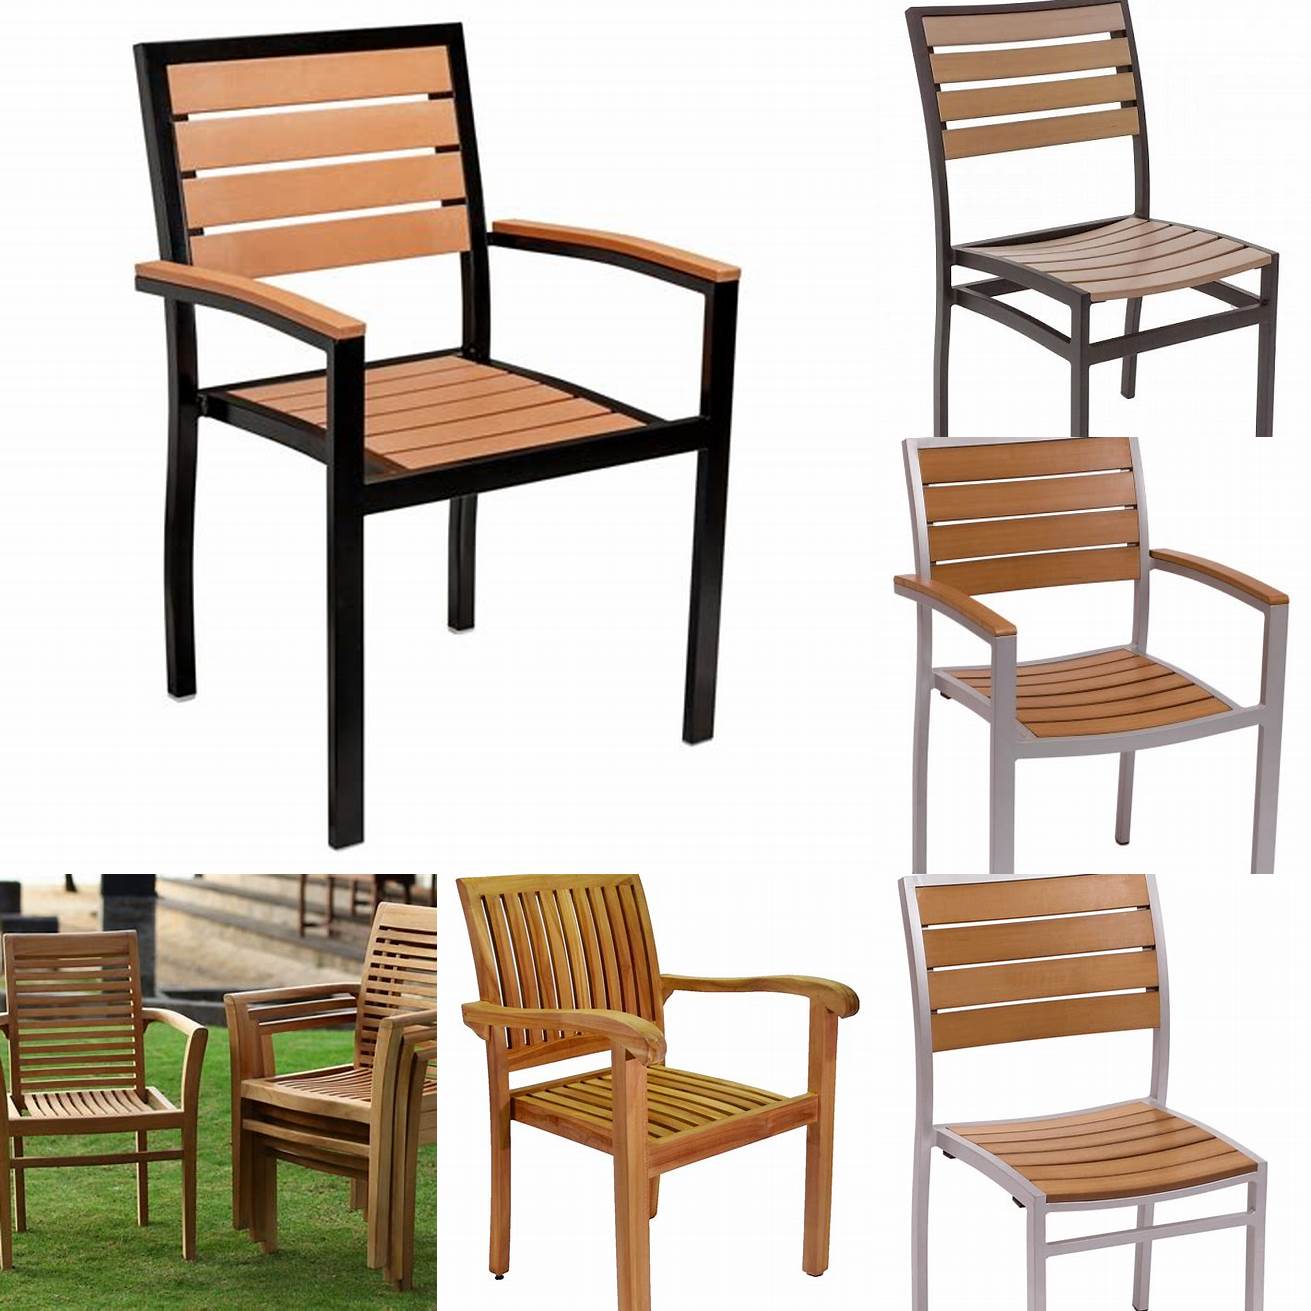 Synthetic teak chairs